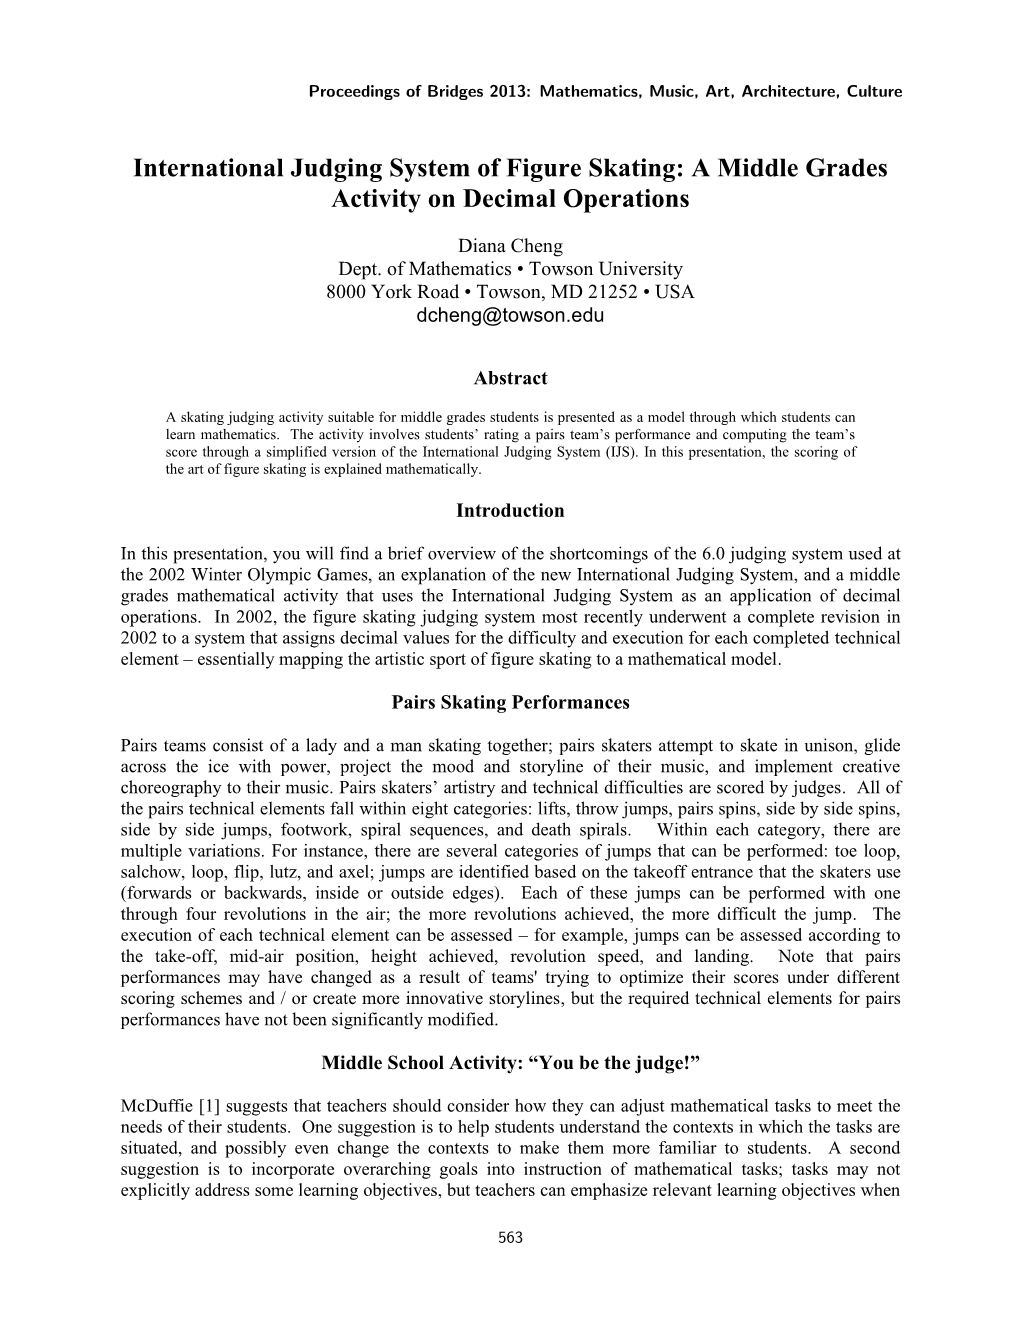 International Judging System of Figure Skating: a Middle Grades Activity on Decimal Operations